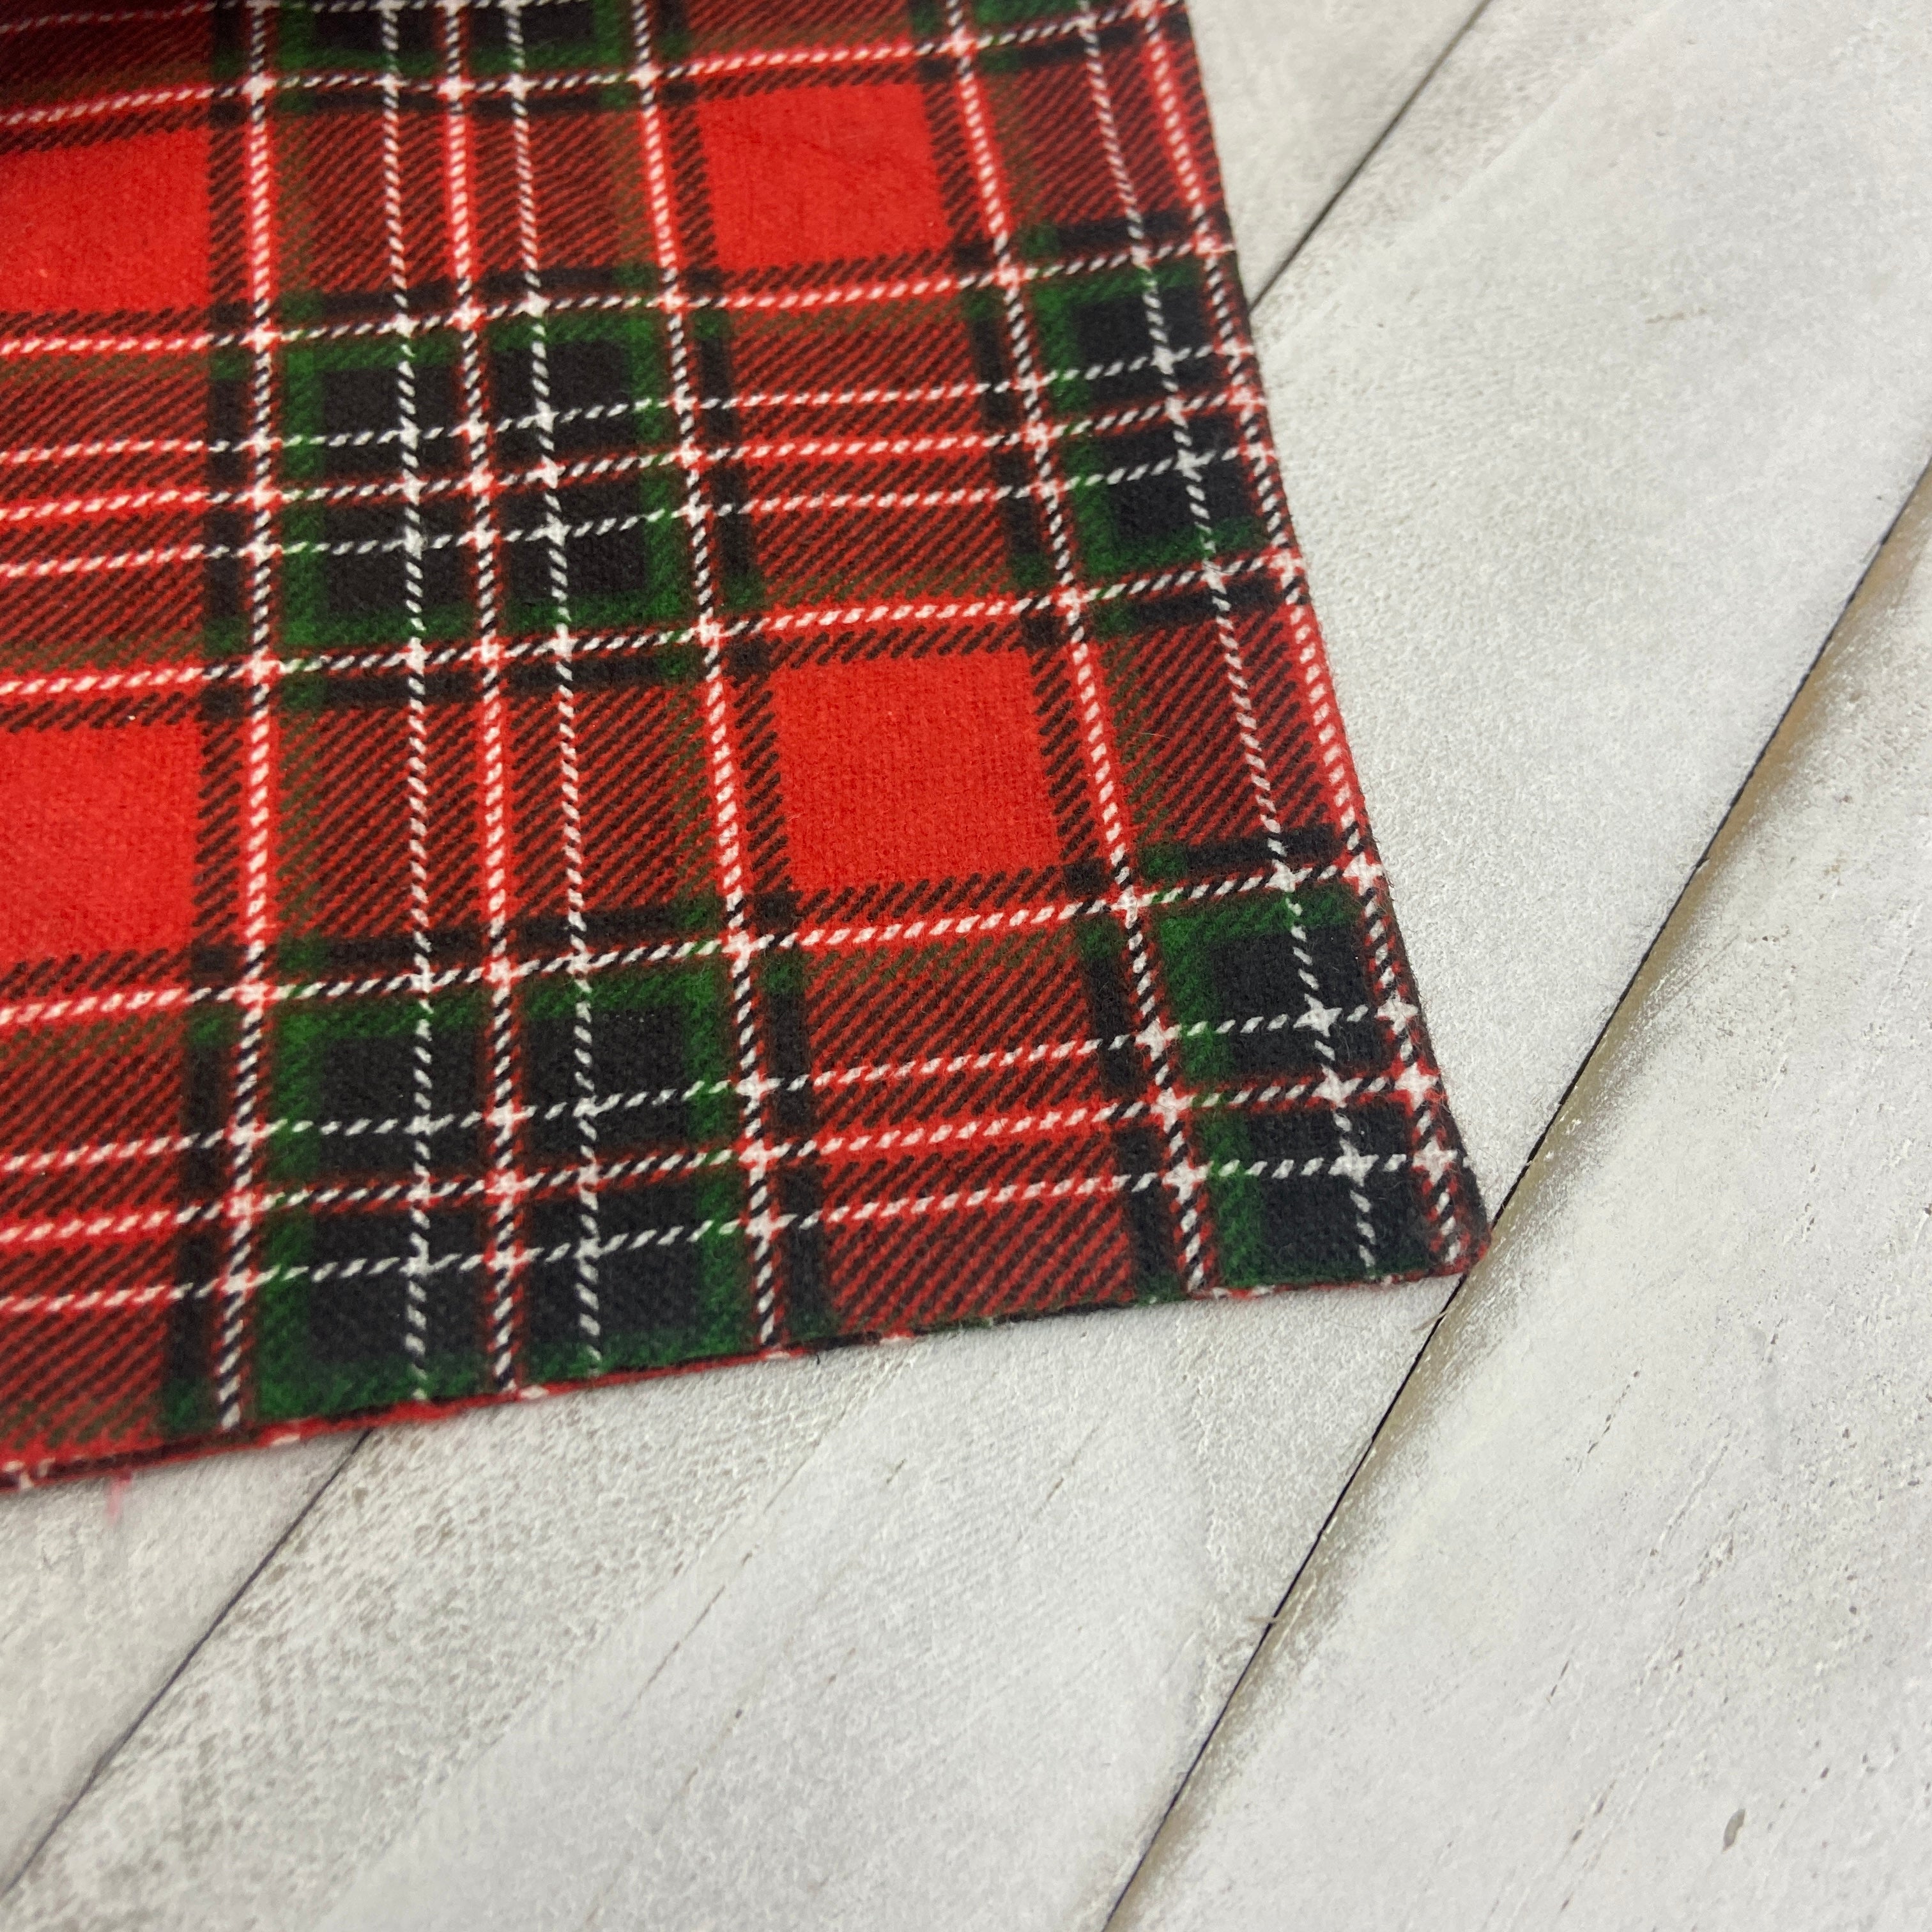 Pet Bandana - Red and Green Plaid Flannel